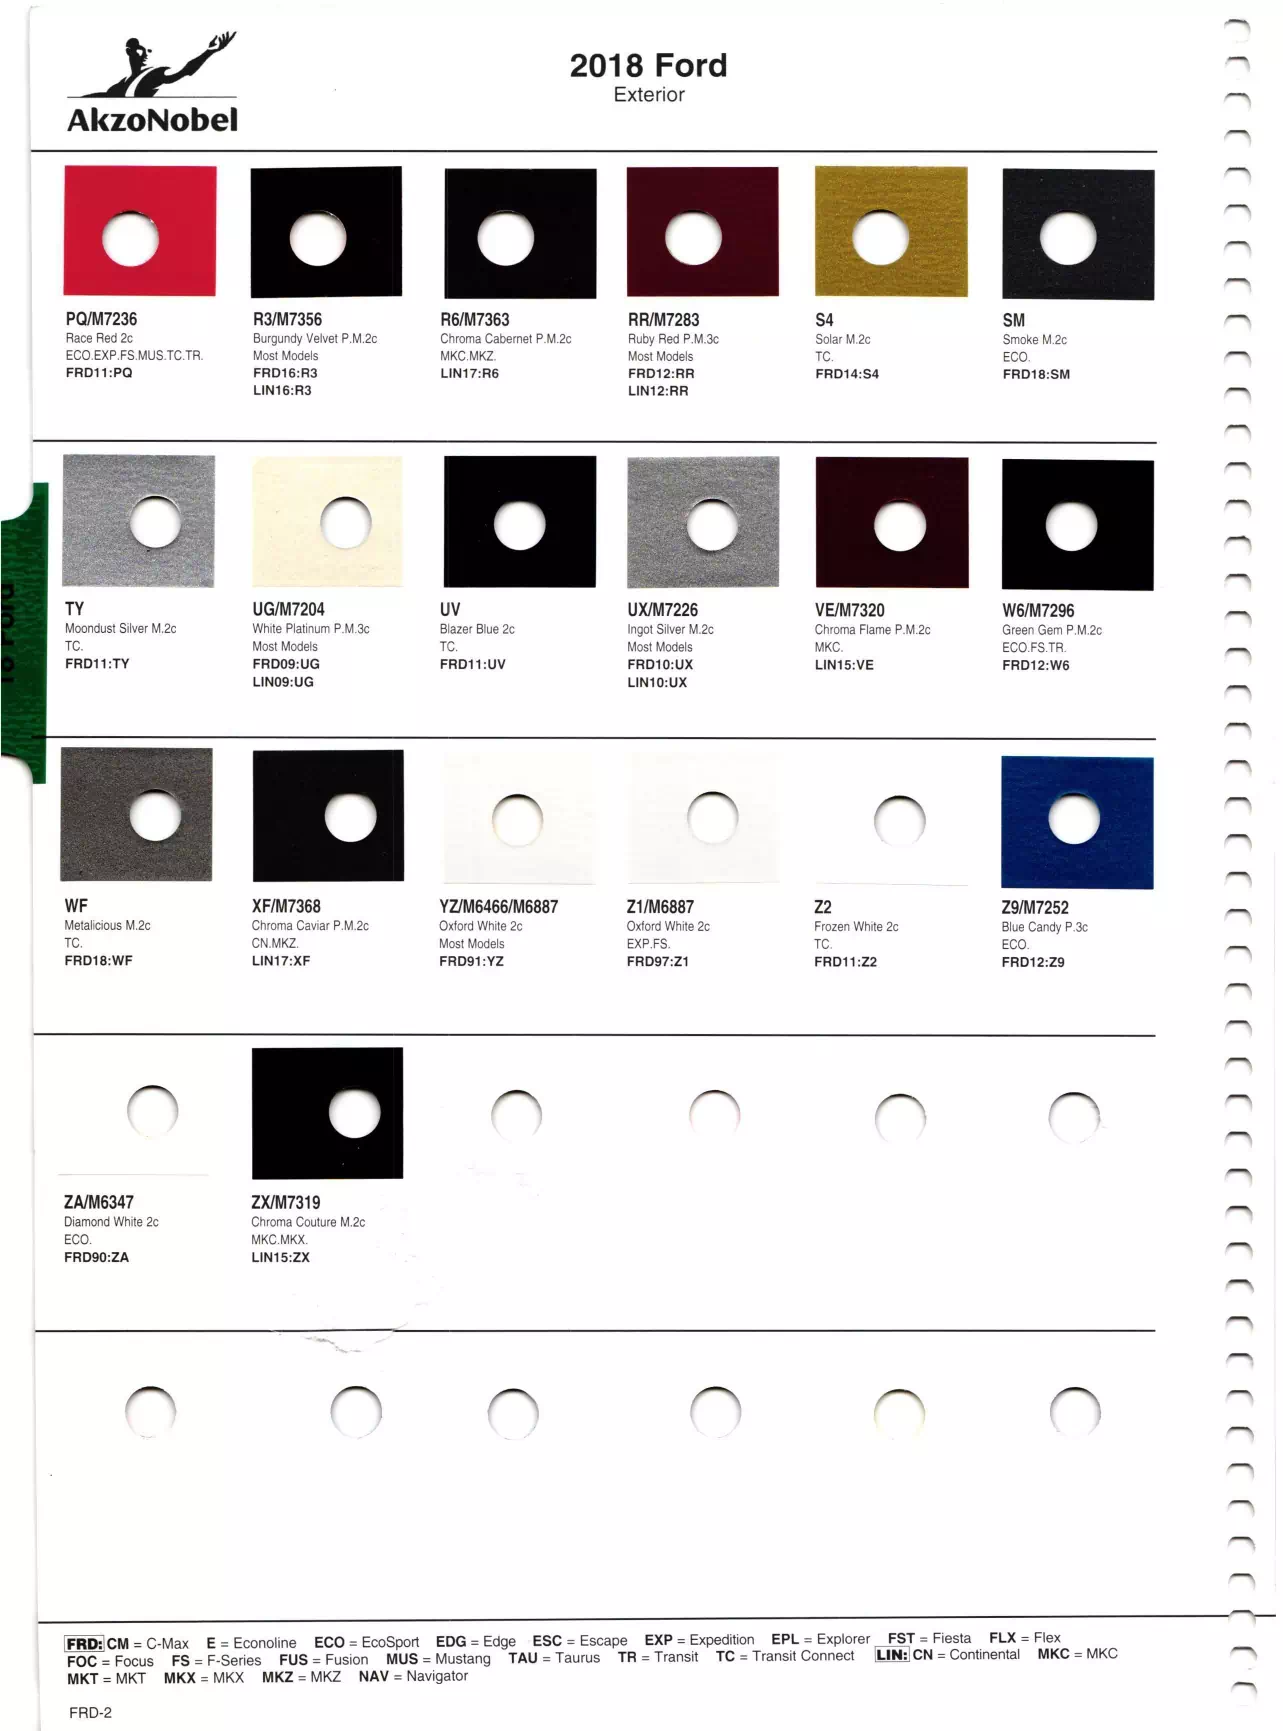 Paint Swatches, Color Names and Ordering Codes for Ford Motor Company (Ford and Lincoln Vehicles) in 2018